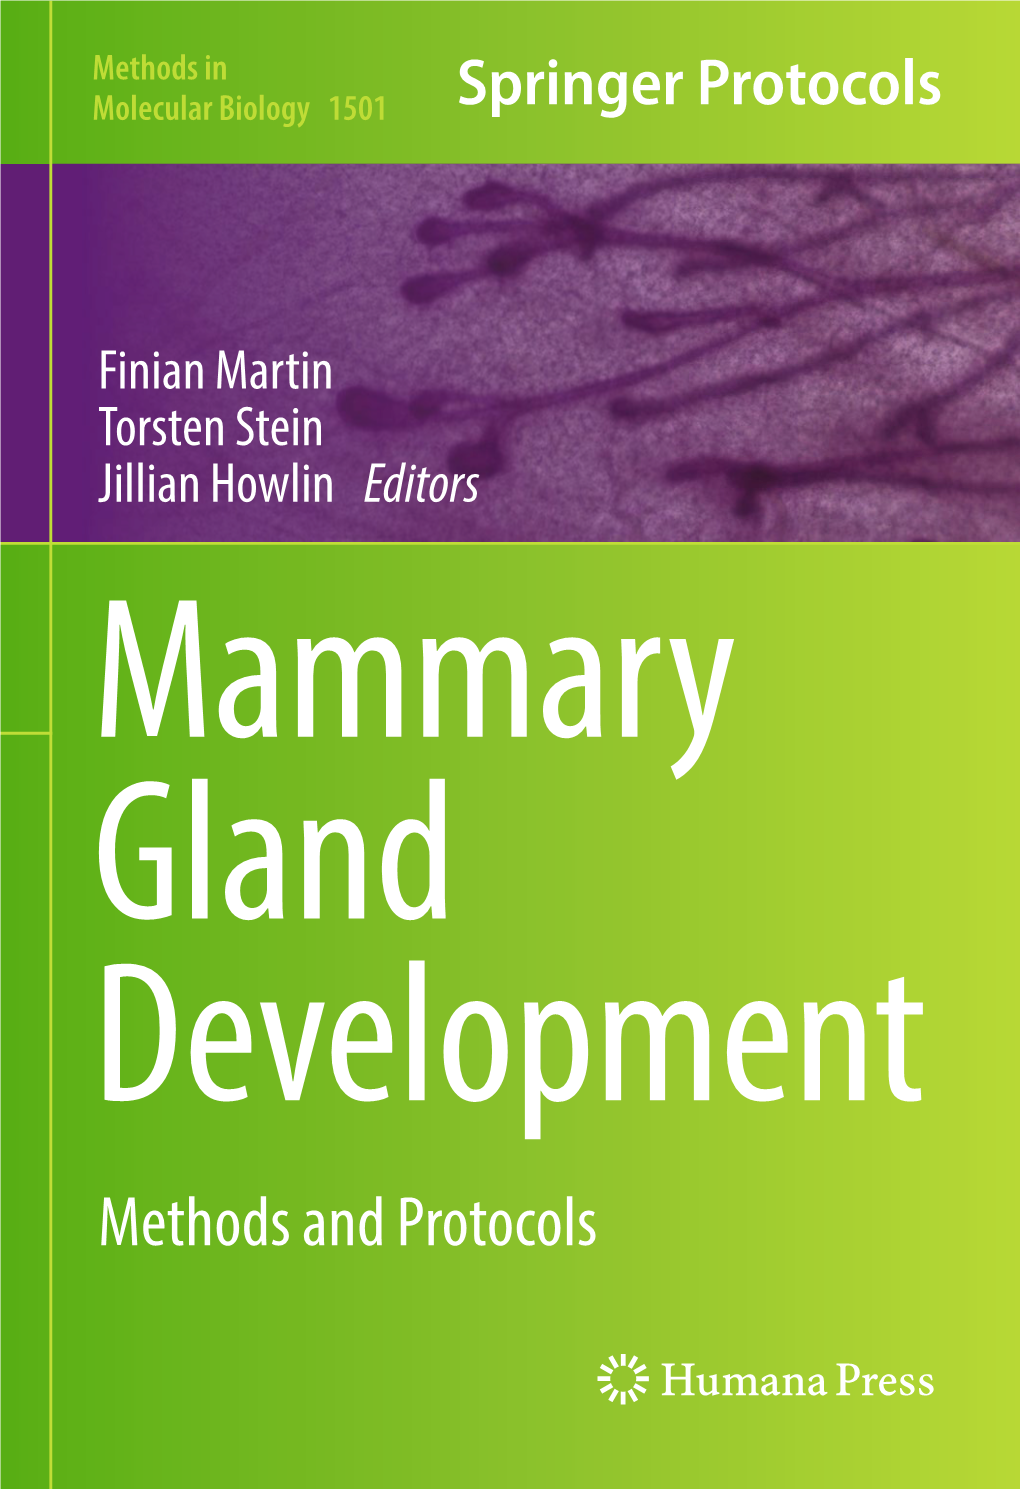 Mammary Gland Development Methods and Protocols M ETHODS in MOLECULAR BIOLOGY